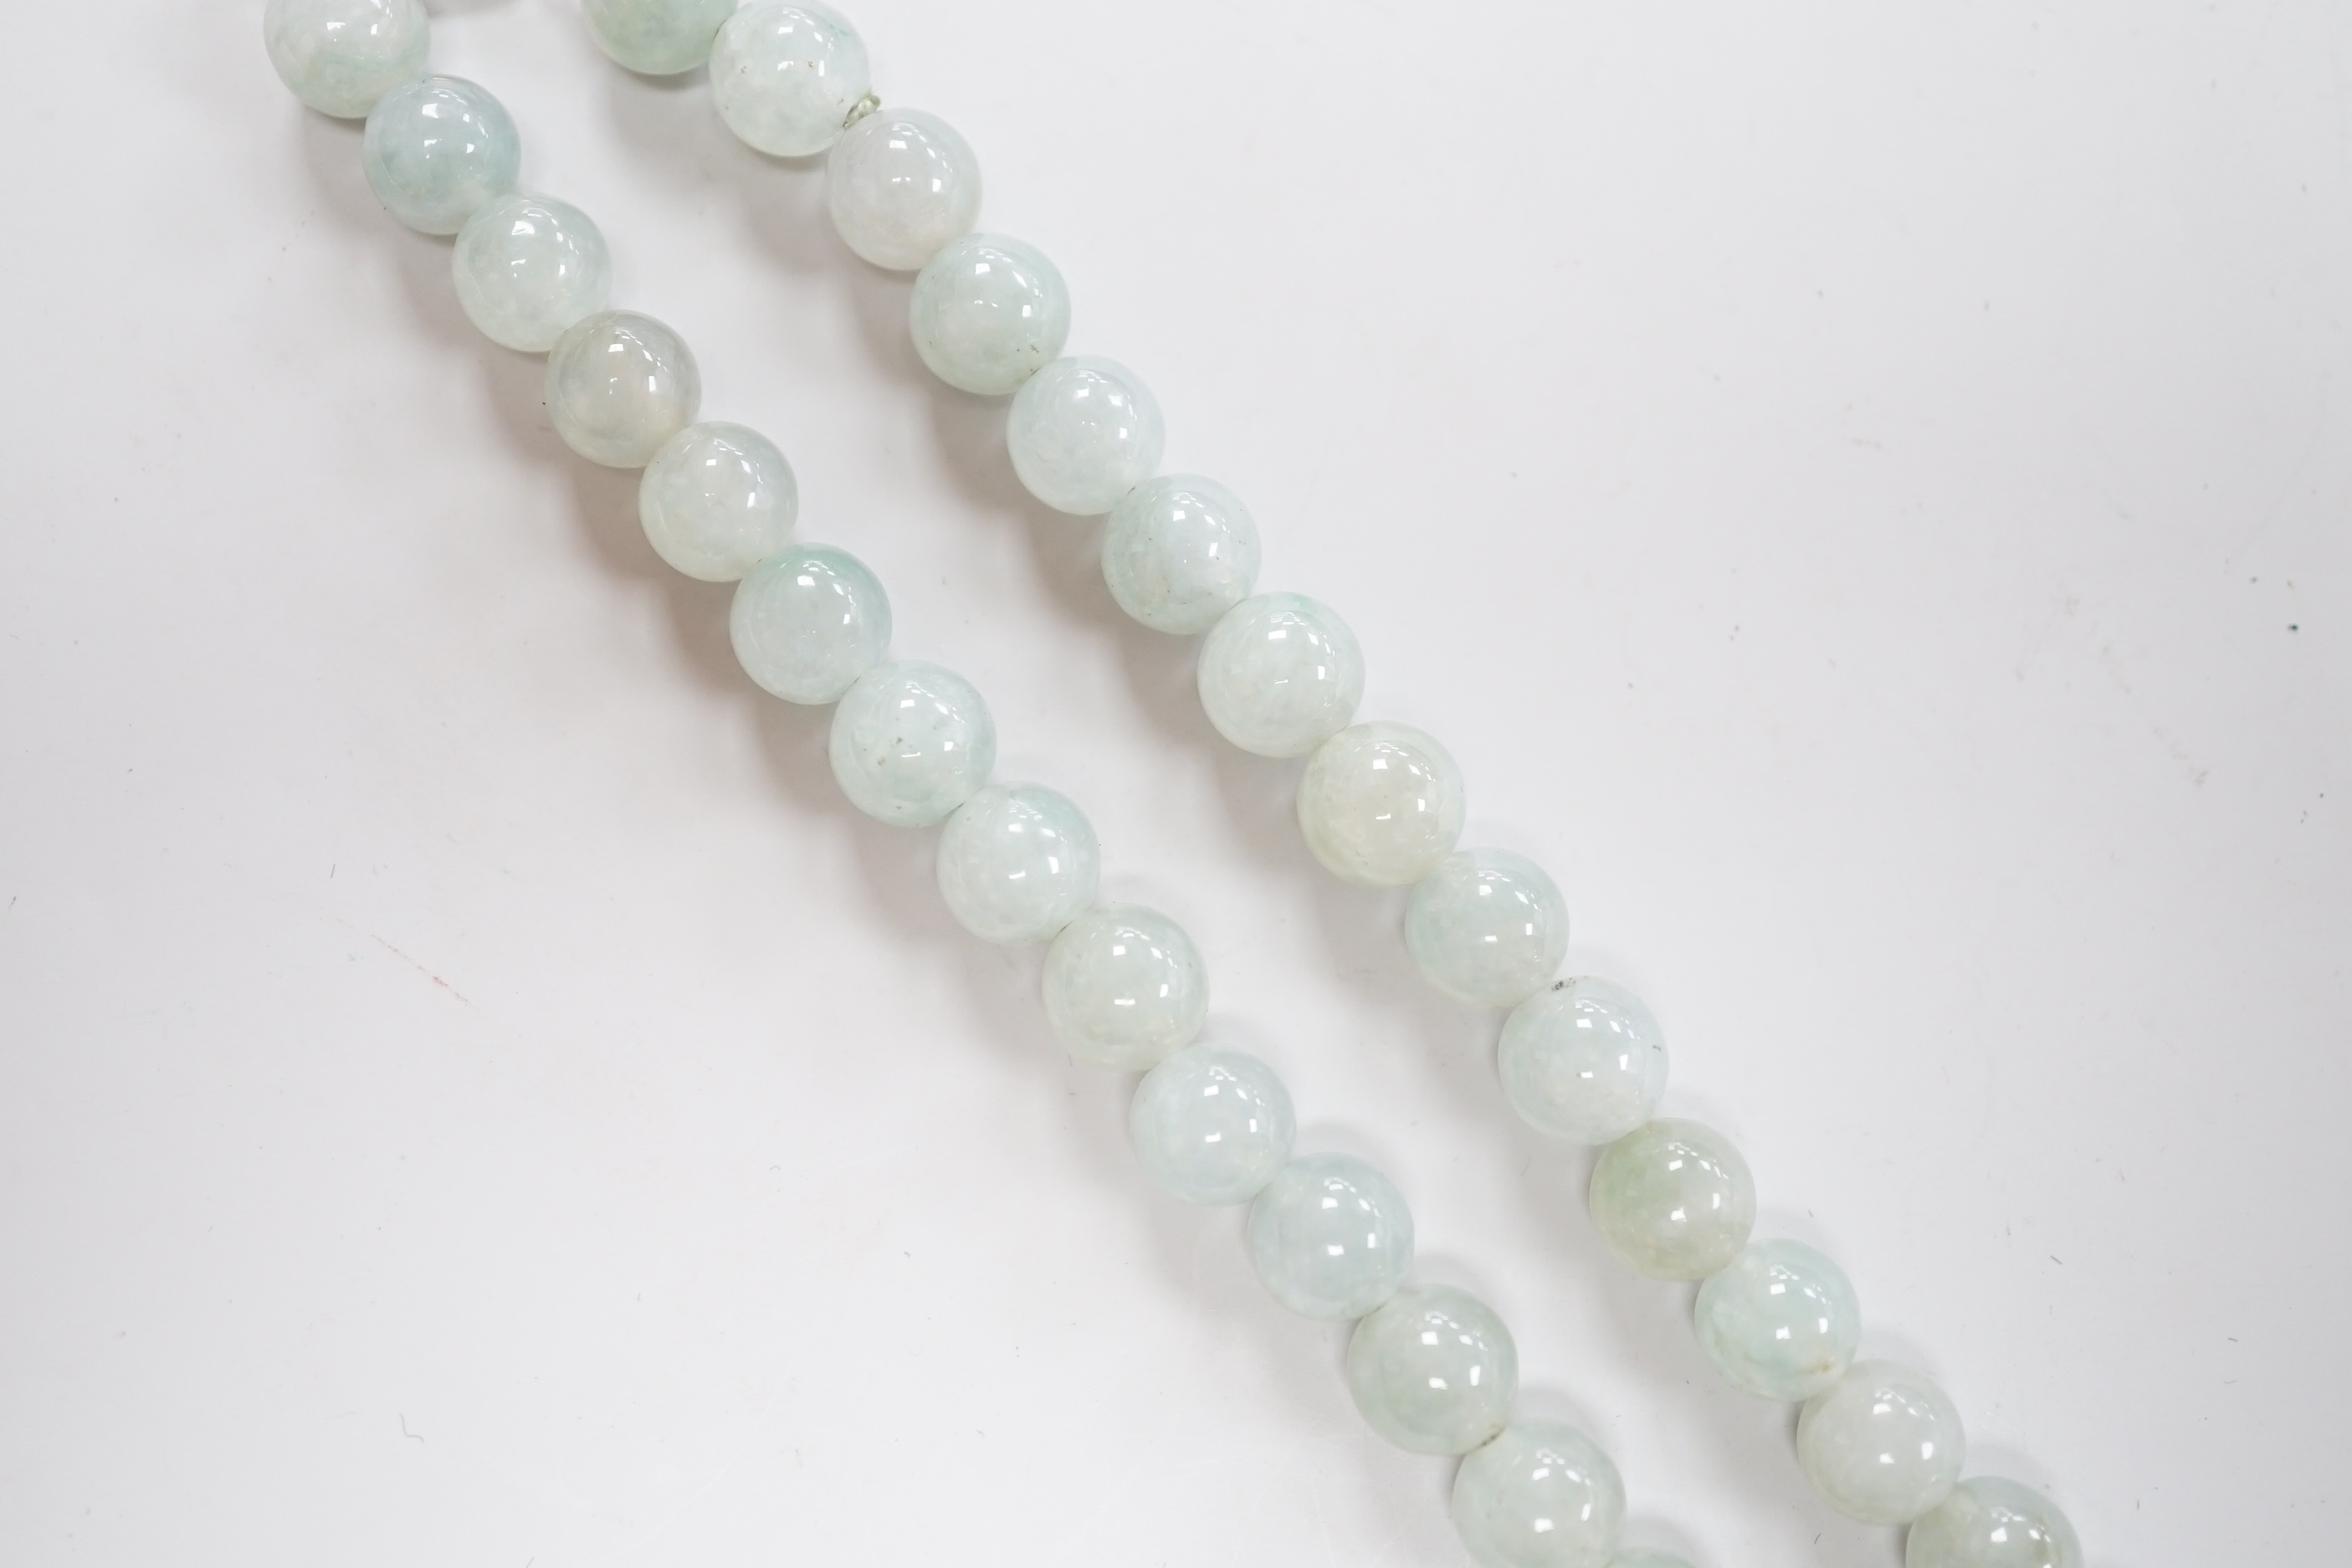 A single strand jadeite bead necklace, with 18k clasp, 43cm, gross weight 58.7 grams, with accompanying Gem & Pearl Laboratory report dated 18/03/2019, stating the jade to have no evidence of treatment.